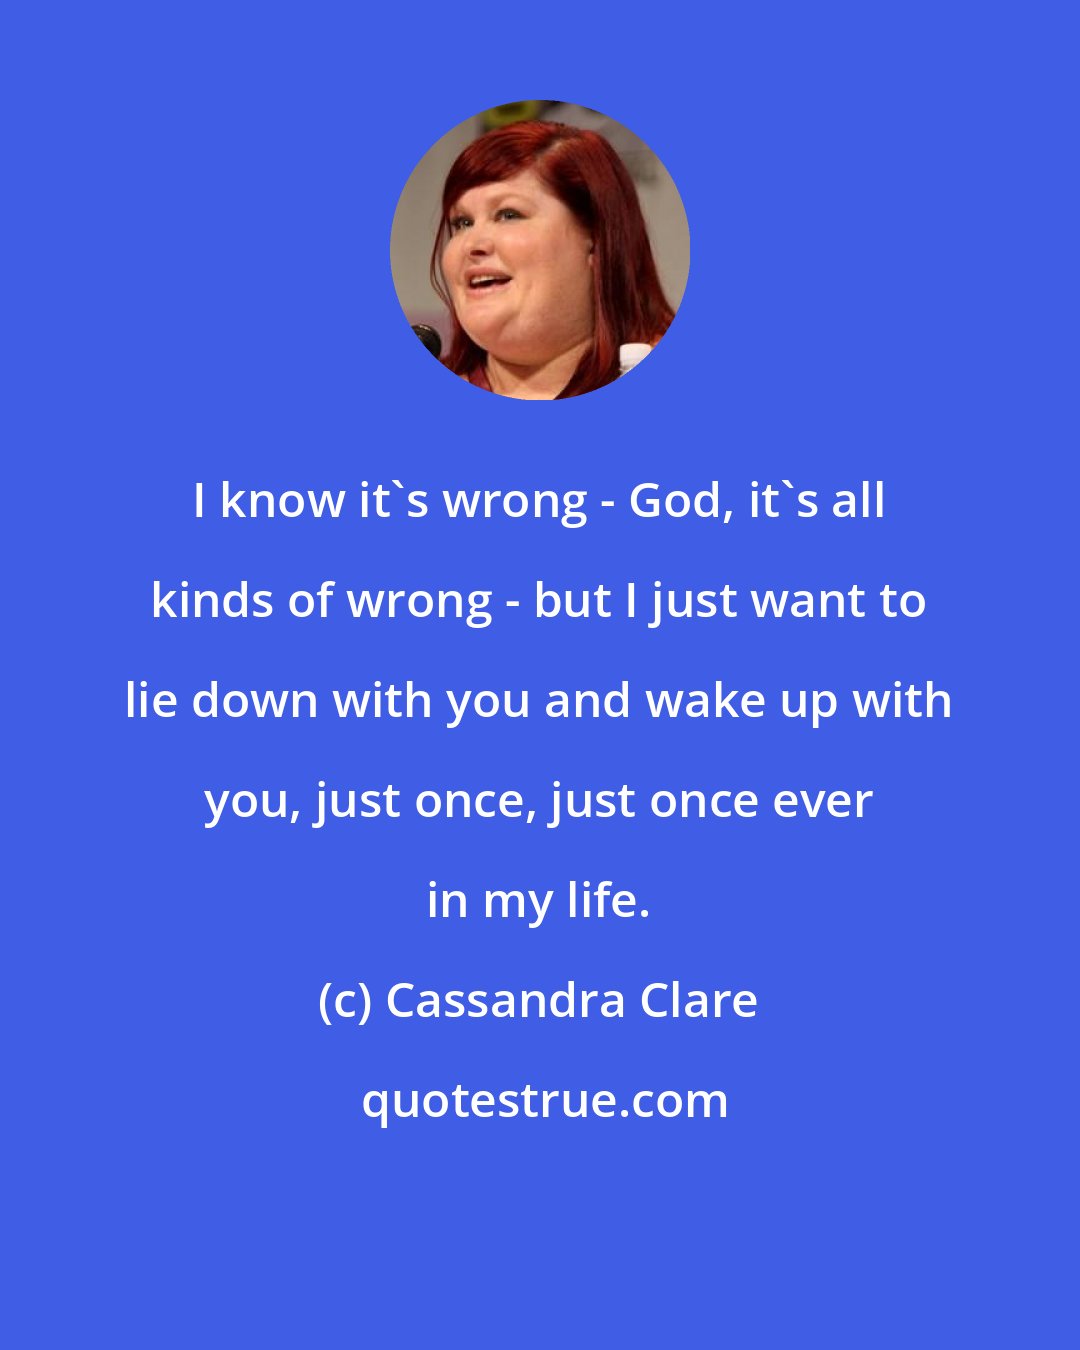 Cassandra Clare: I know it's wrong - God, it's all kinds of wrong - but I just want to lie down with you and wake up with you, just once, just once ever in my life.